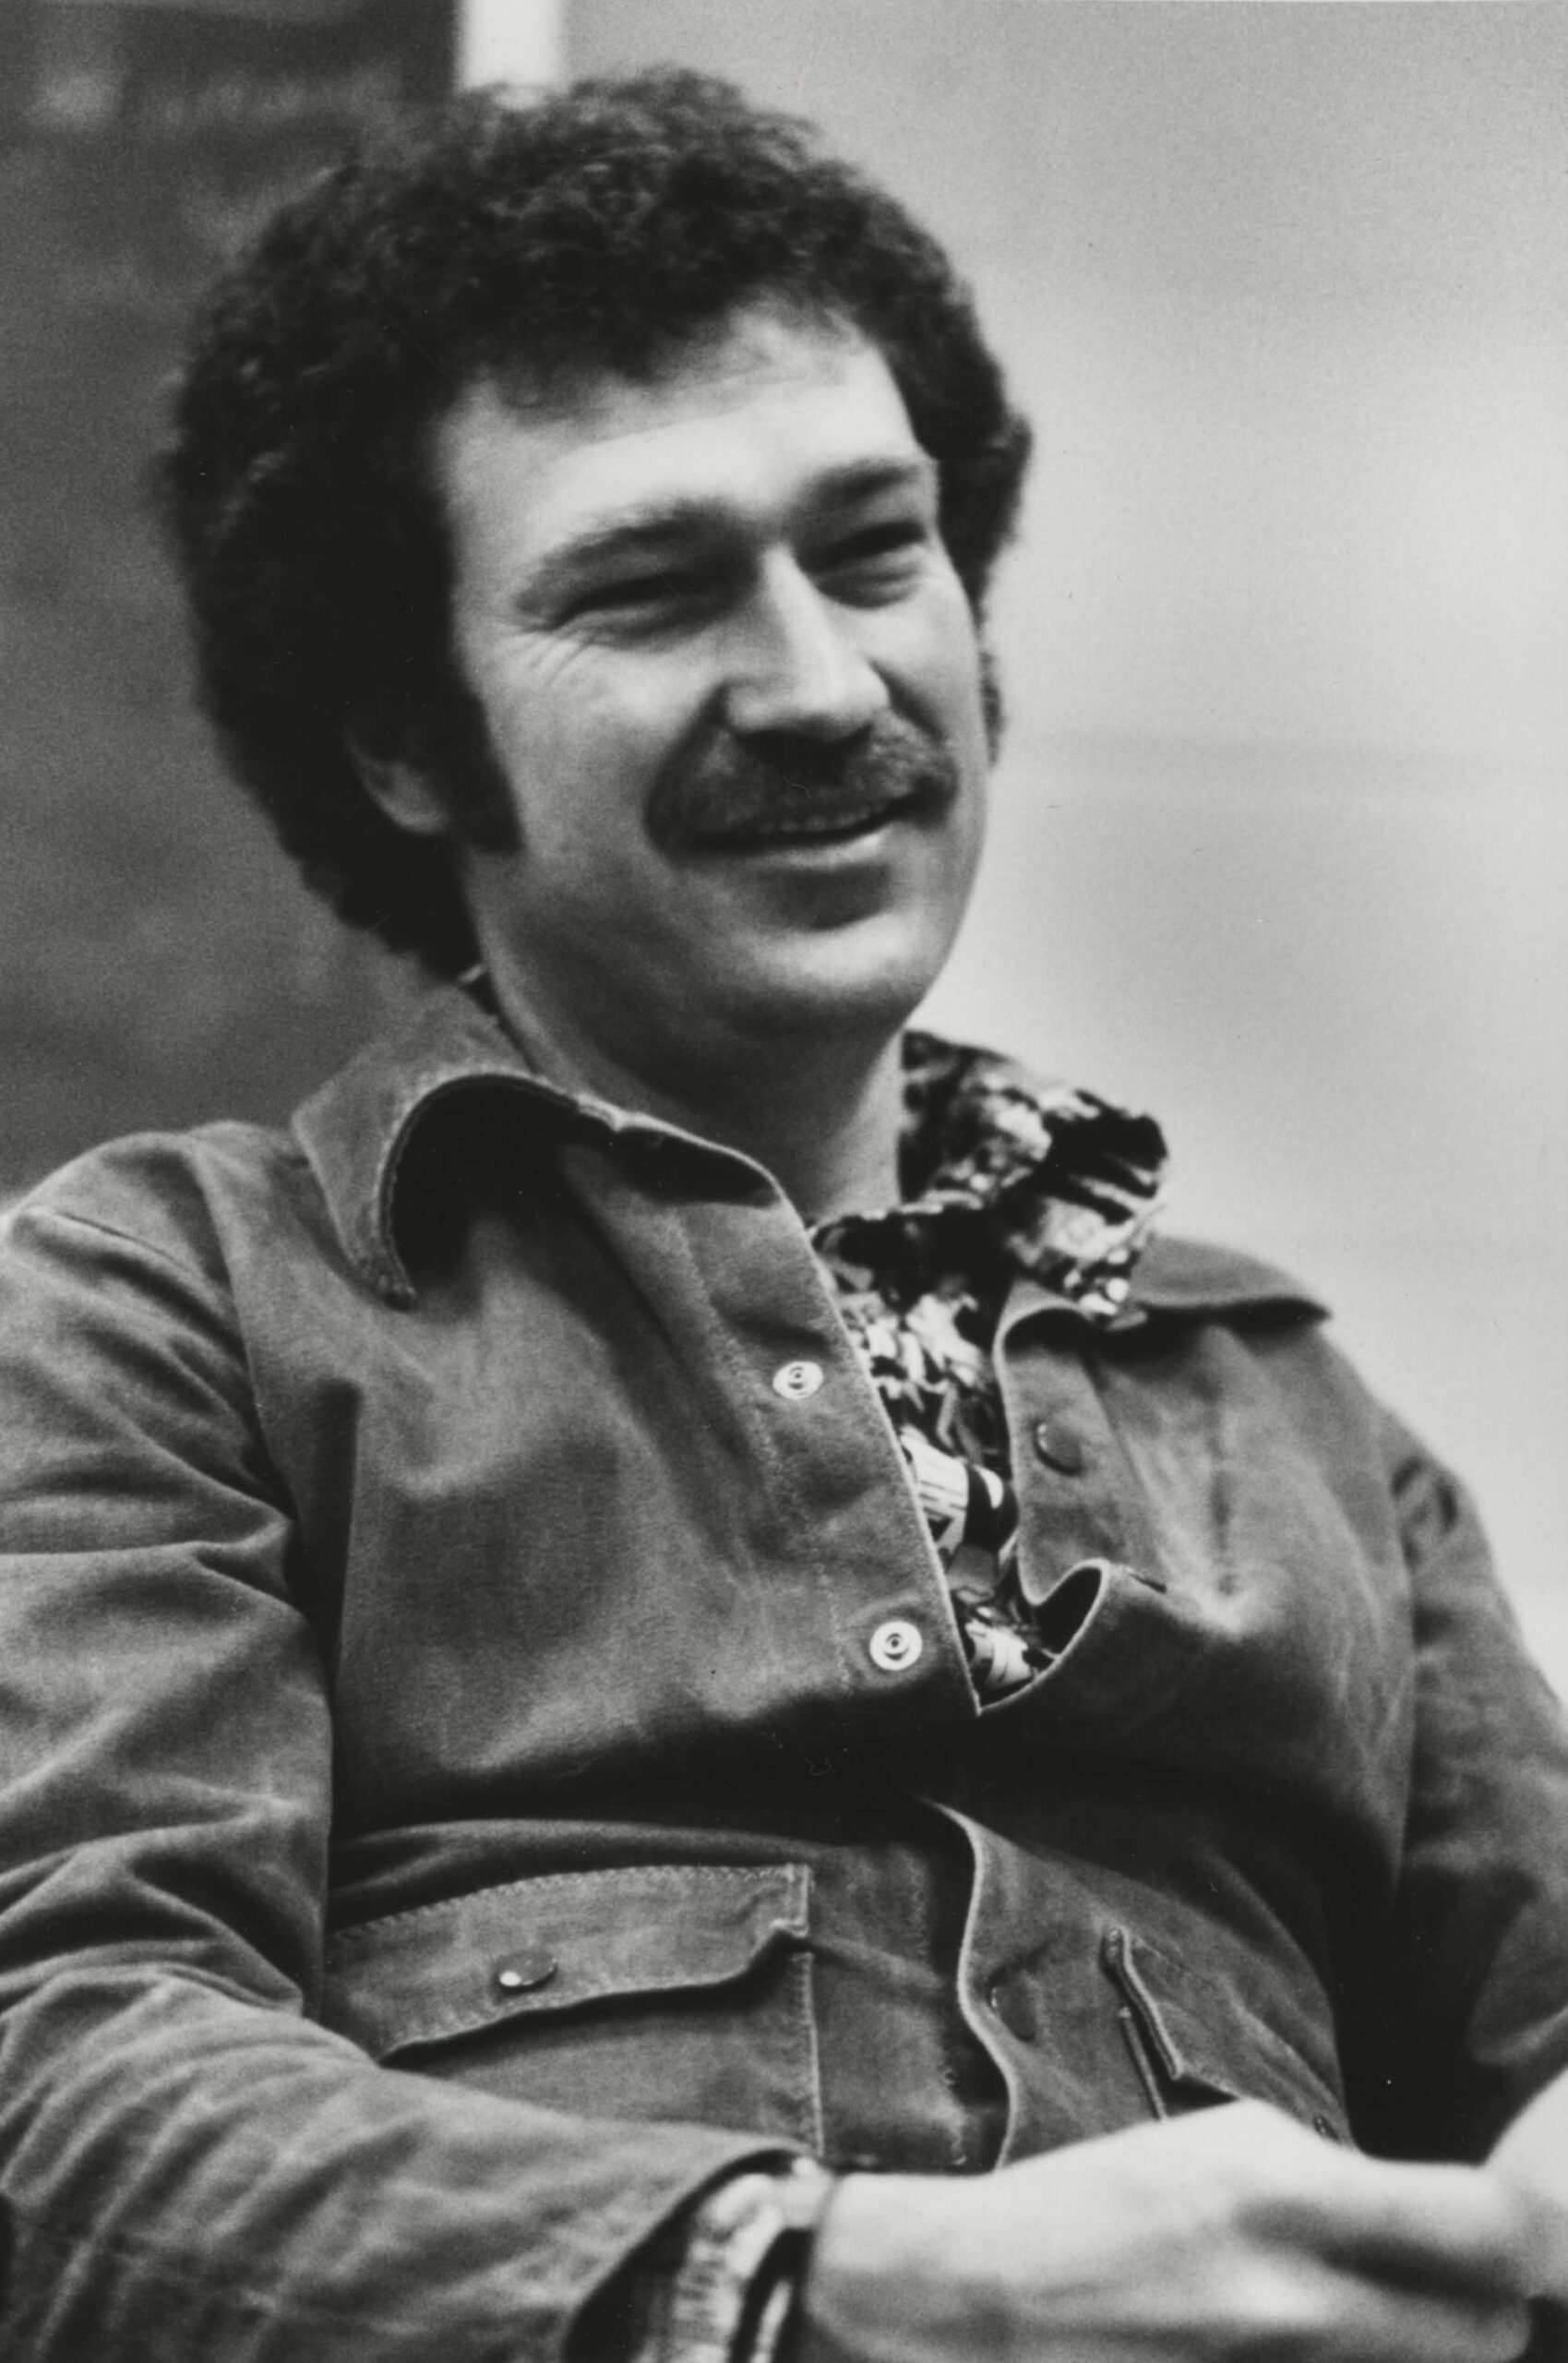 Black and white archival photo of Michael Jensen seated and leaning back dressed in a casual outfit.